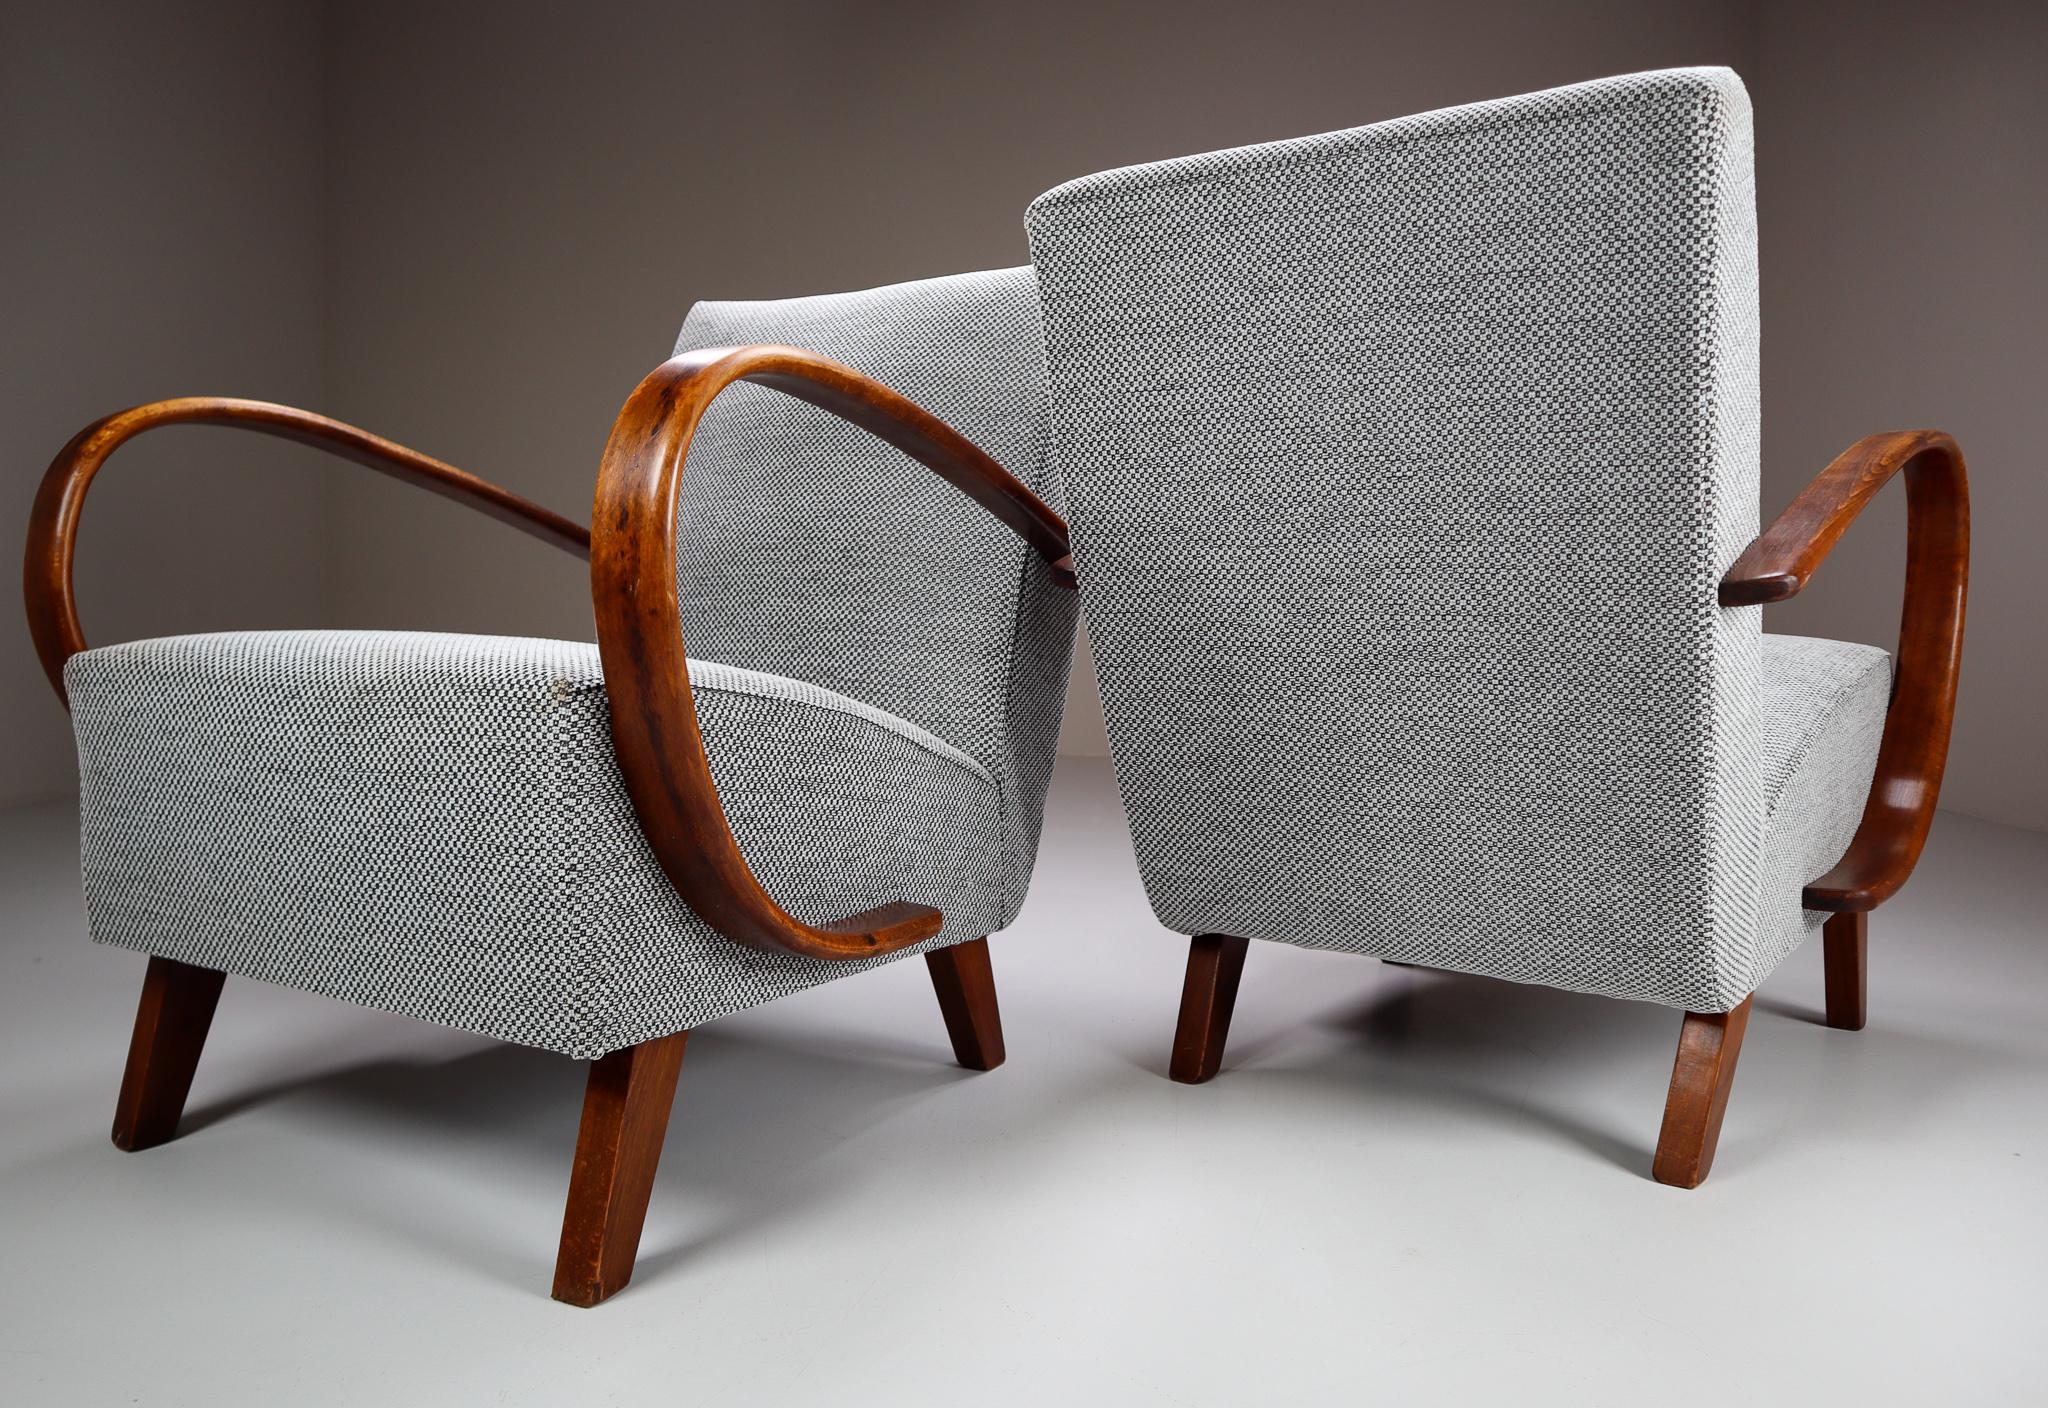 Jindrich Halabala Re-Upholstered Bentwood Armchairs, 1940s Czech Republic In Good Condition In Almelo, NL